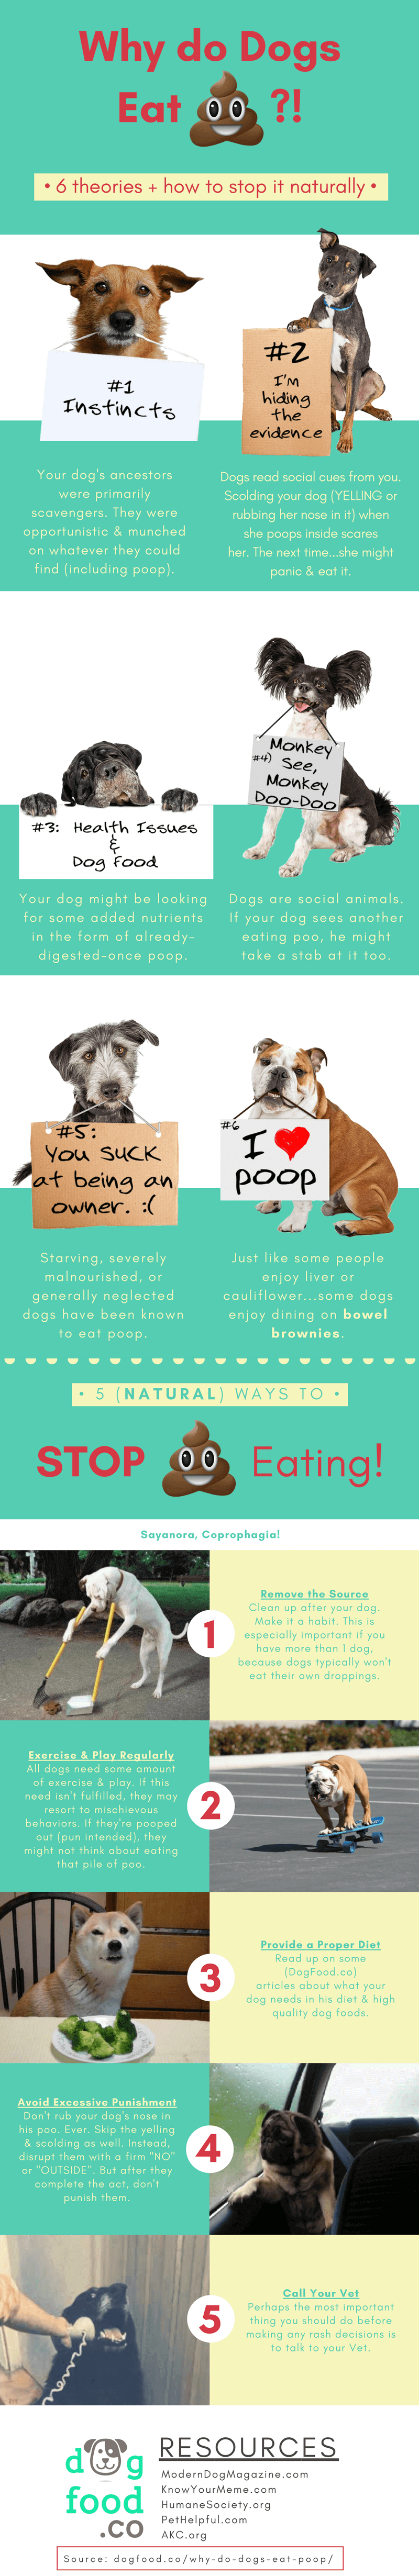 Why do dogs eat poop infographic